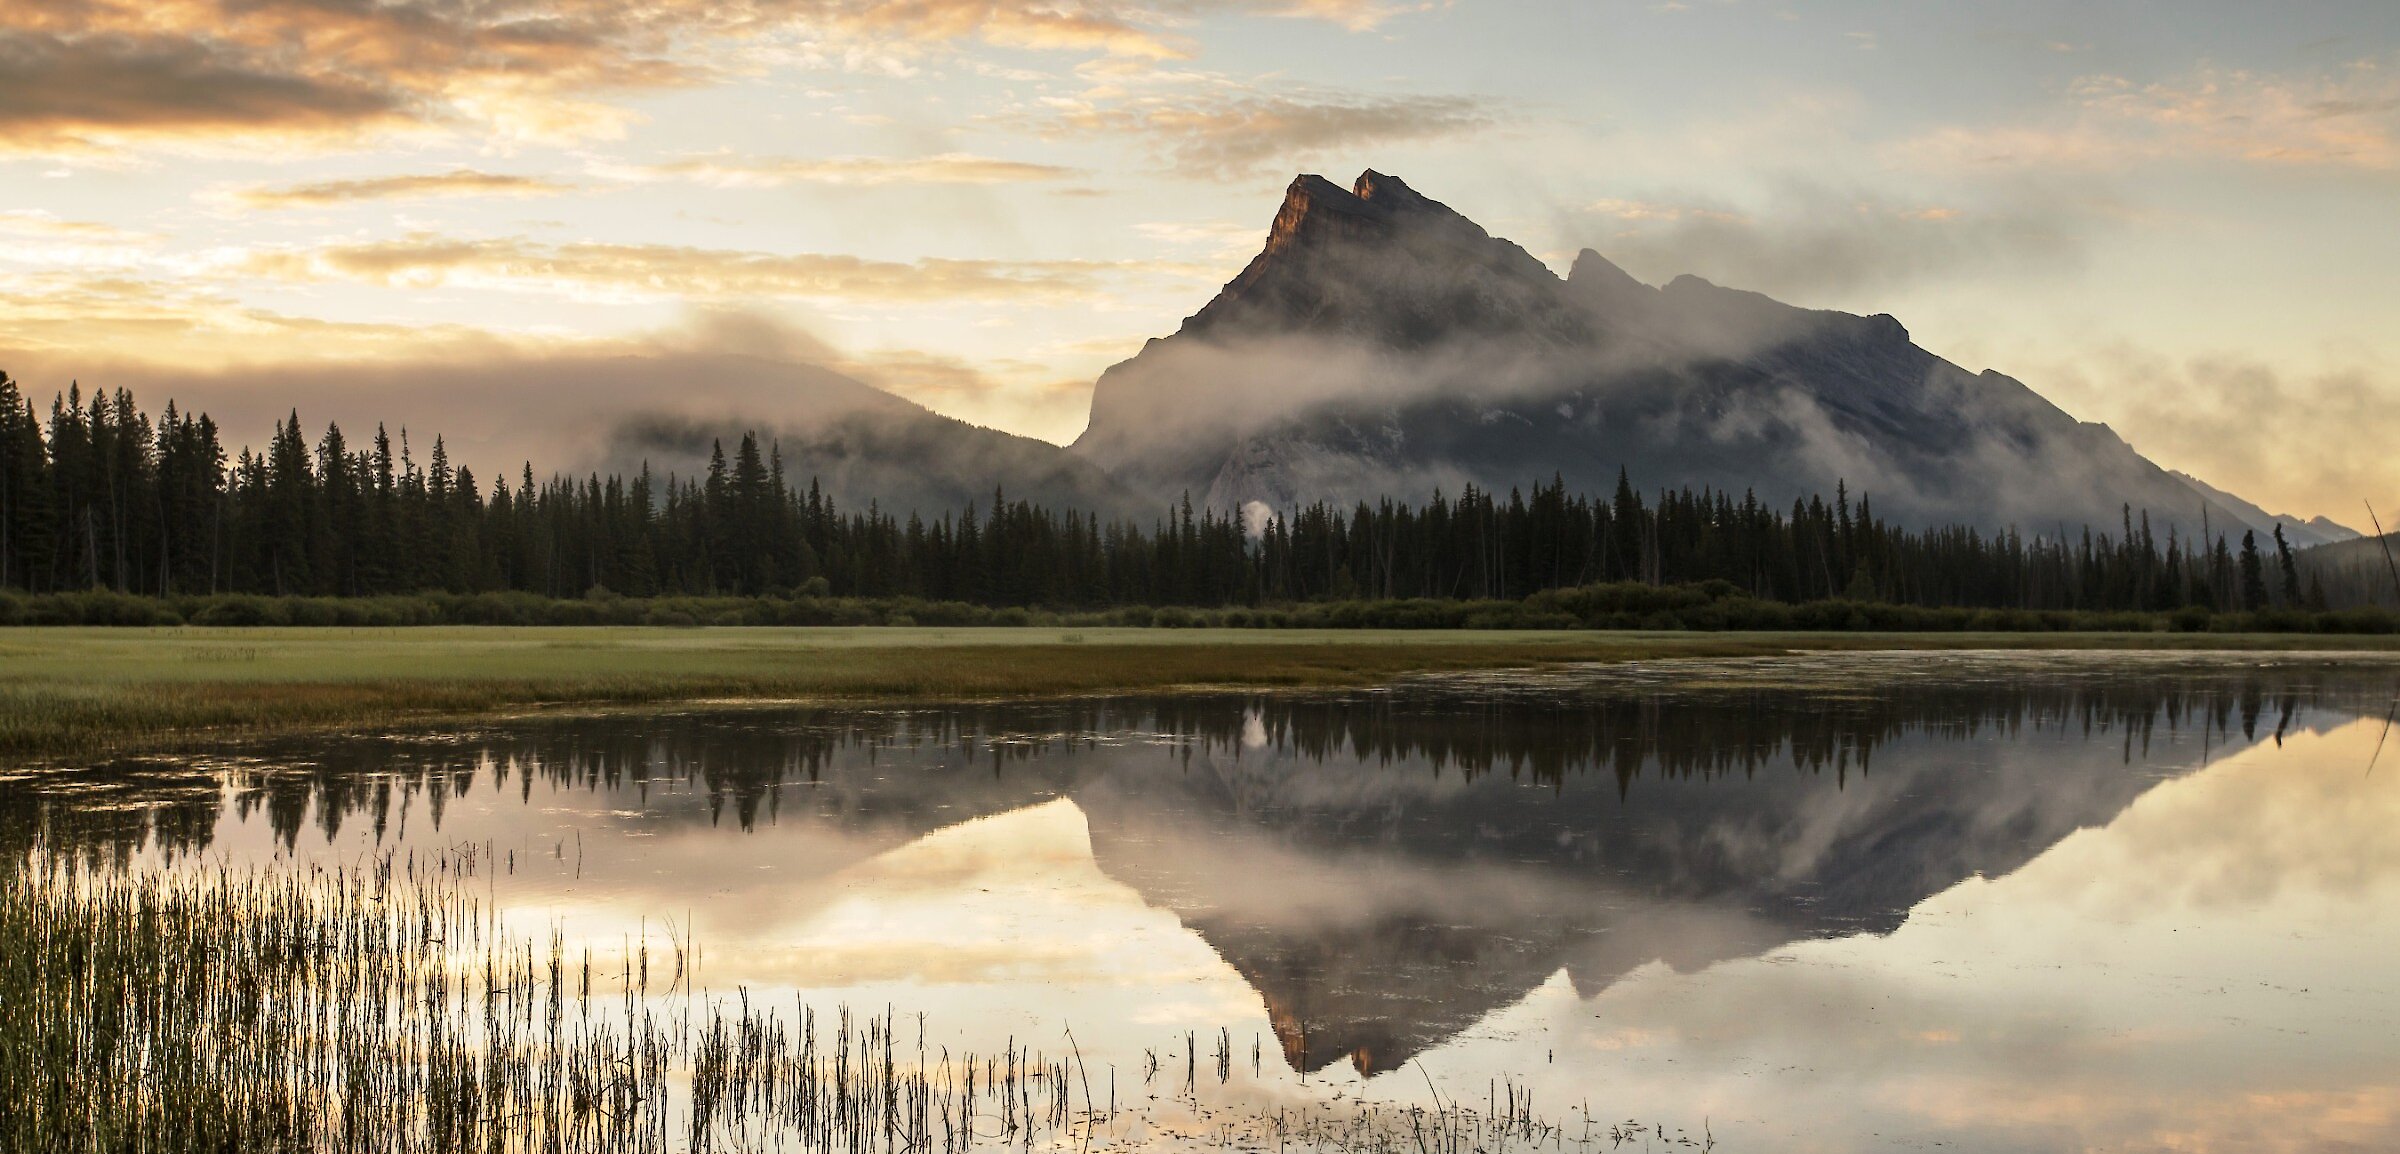 Stunning views of Mount Rundle and Vermilian Lakes